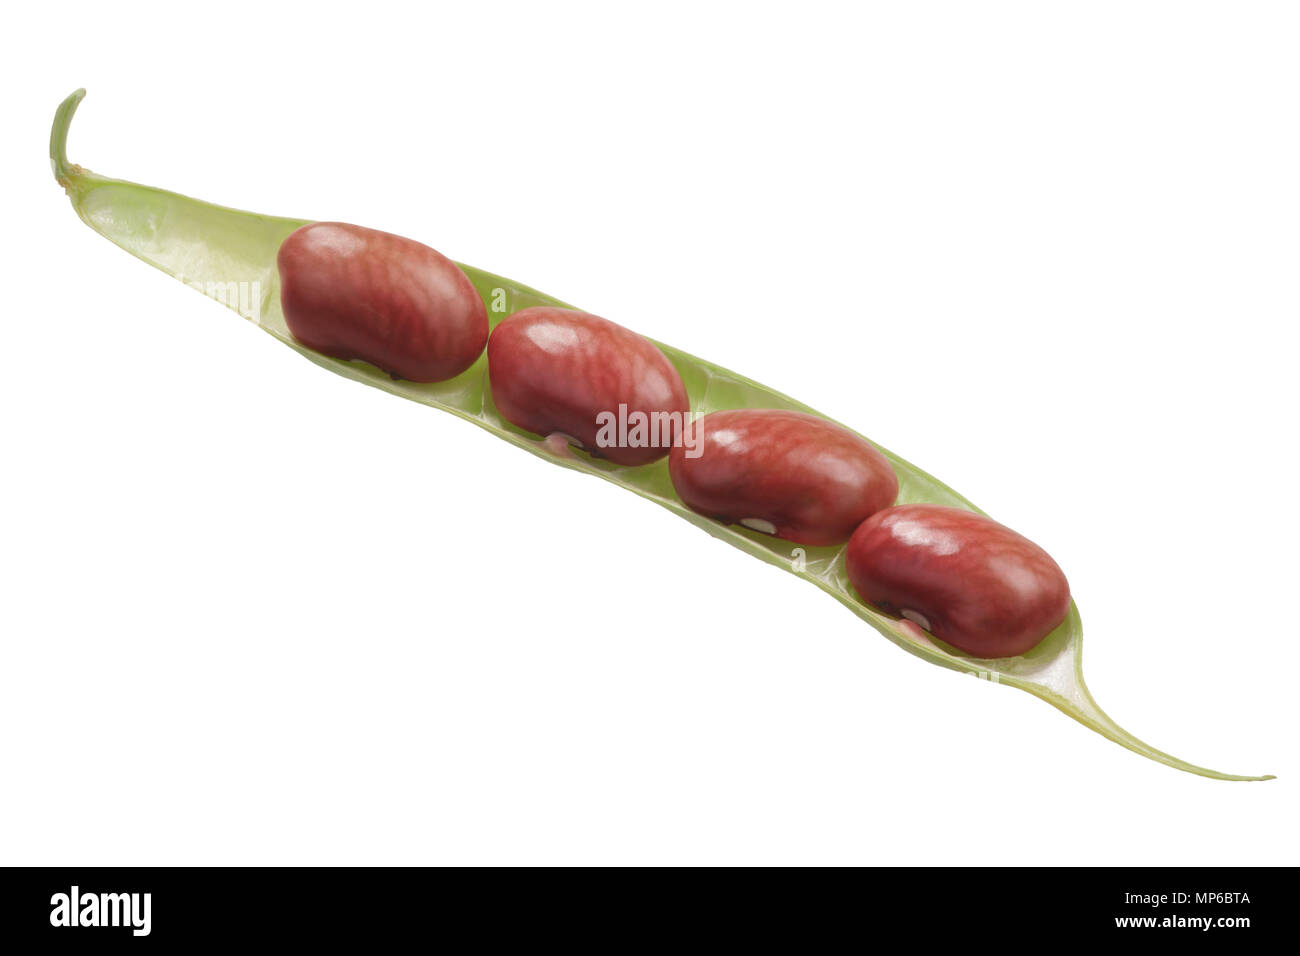 Red kidney bean (Phaseolus vulgaris) pods with seeds shown Stock Photo